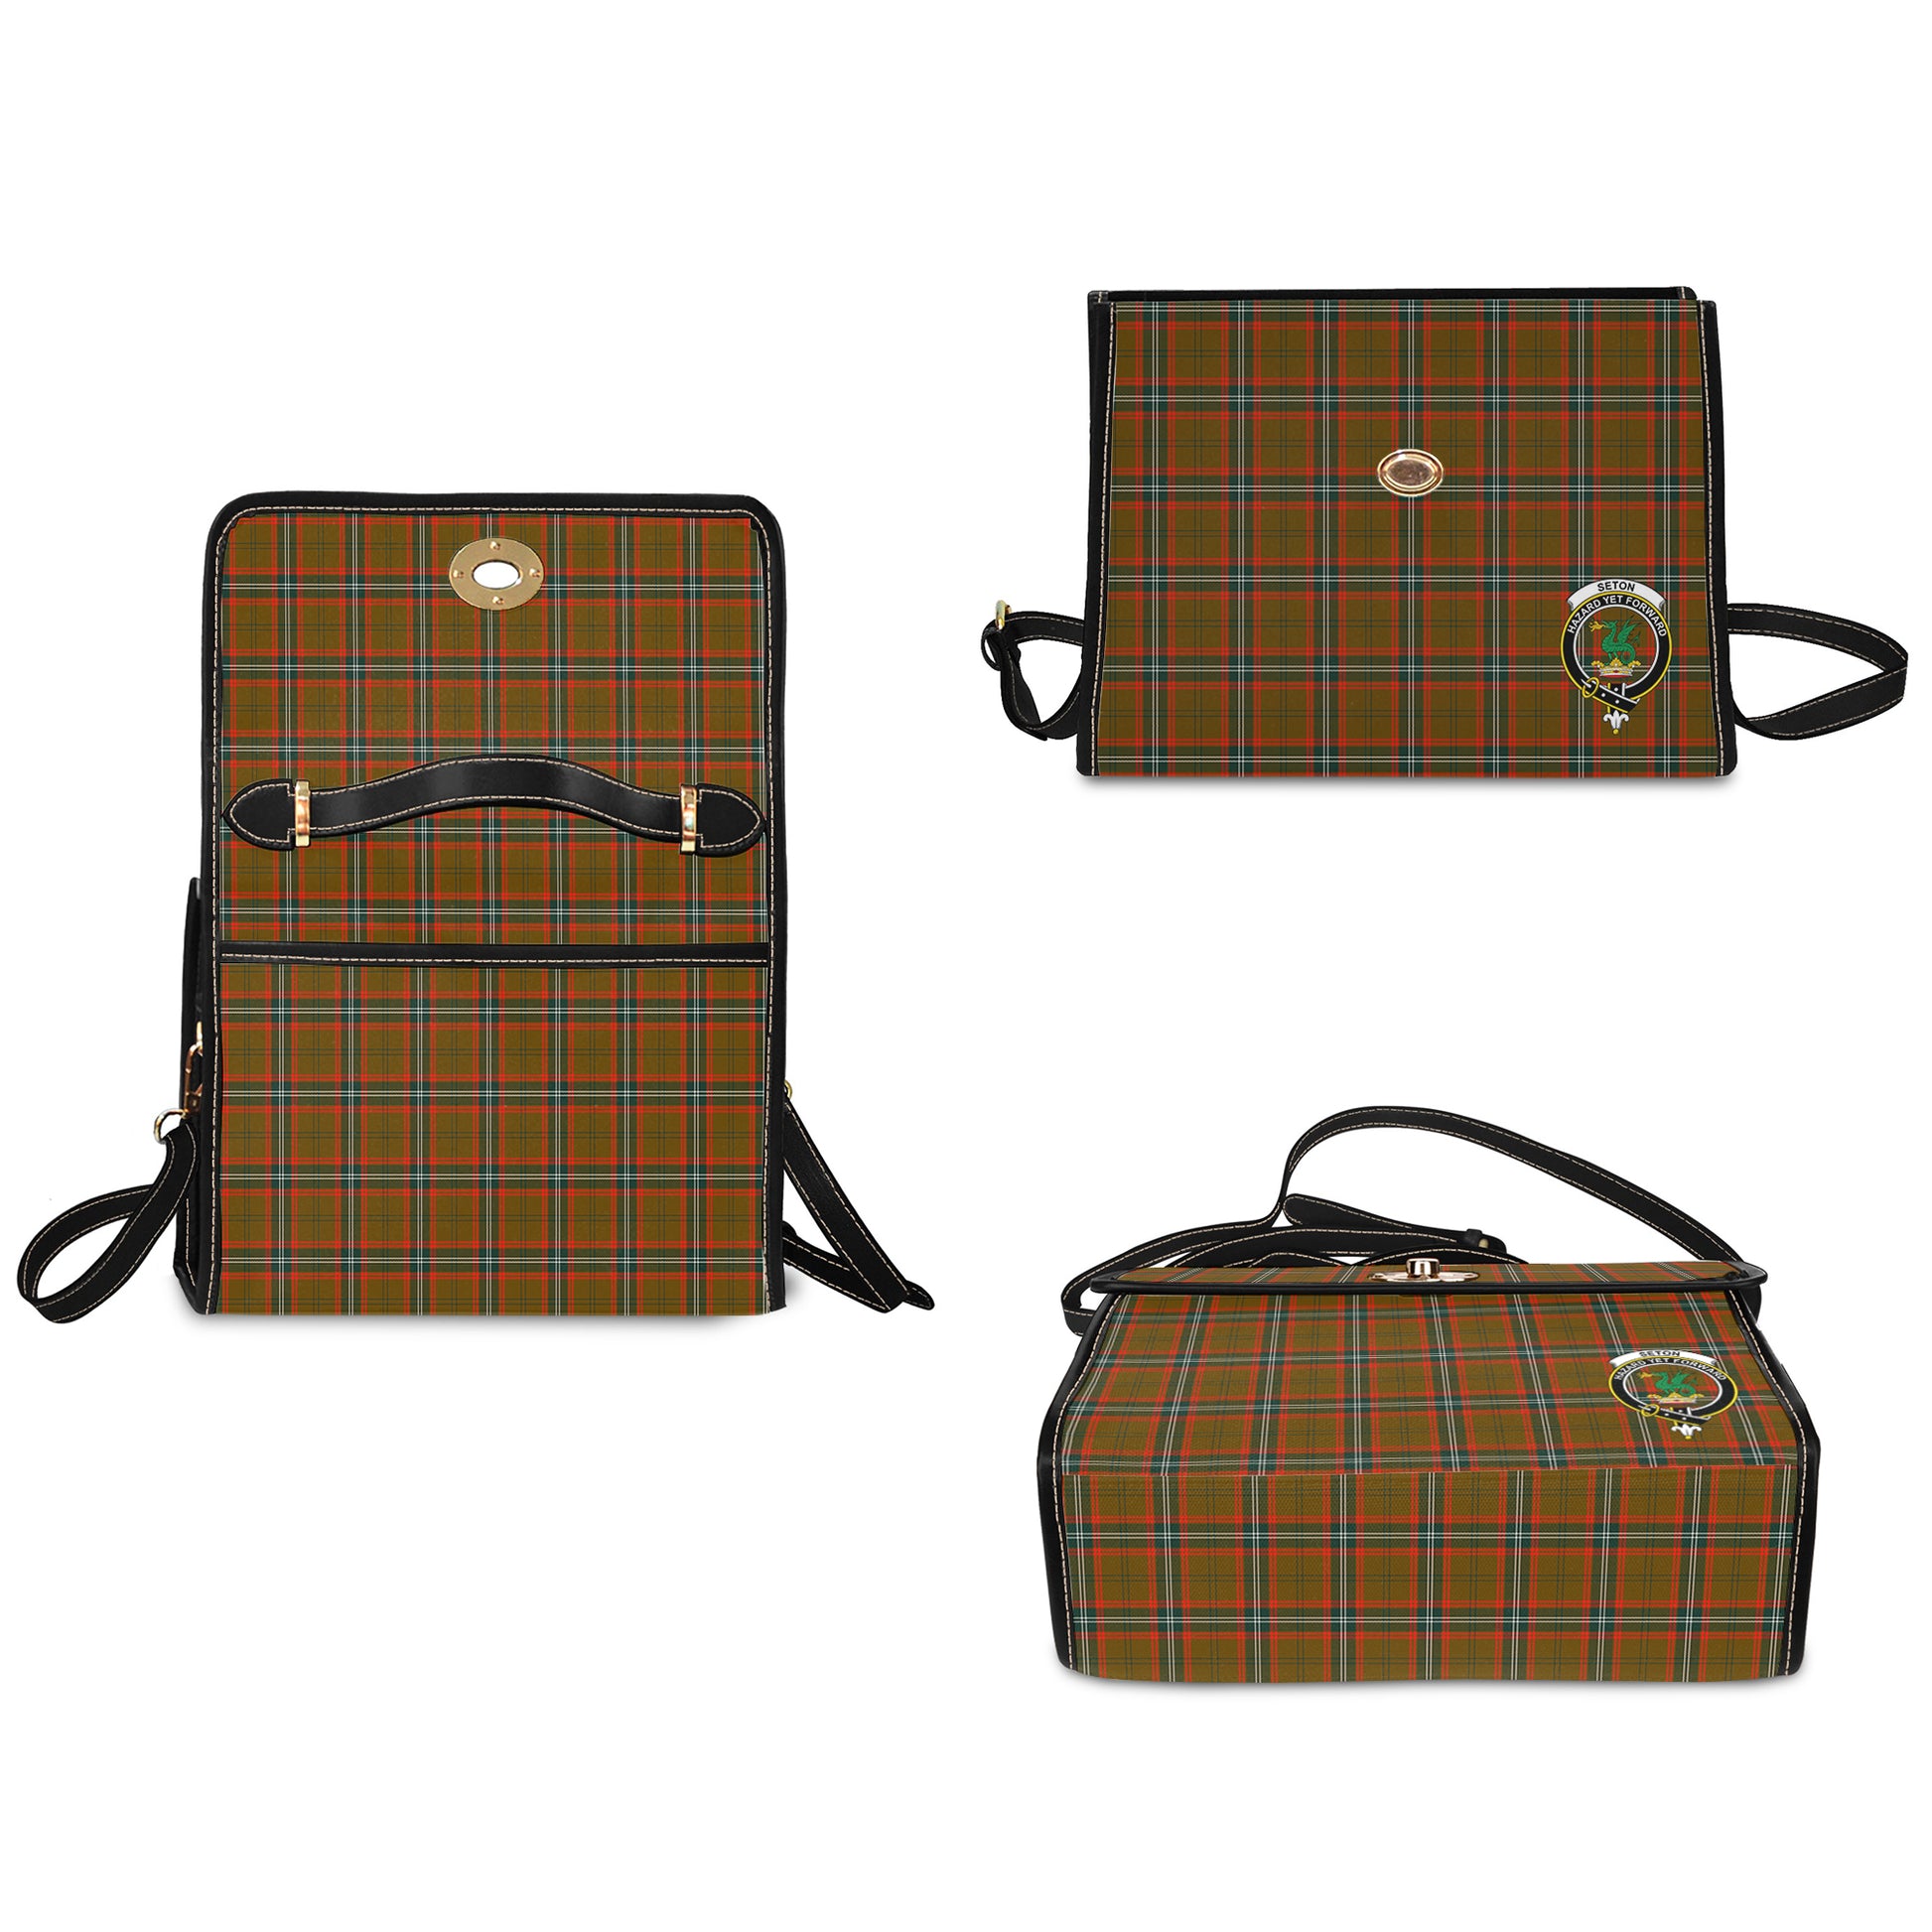 seton-hunting-modern-tartan-leather-strap-waterproof-canvas-bag-with-family-crest